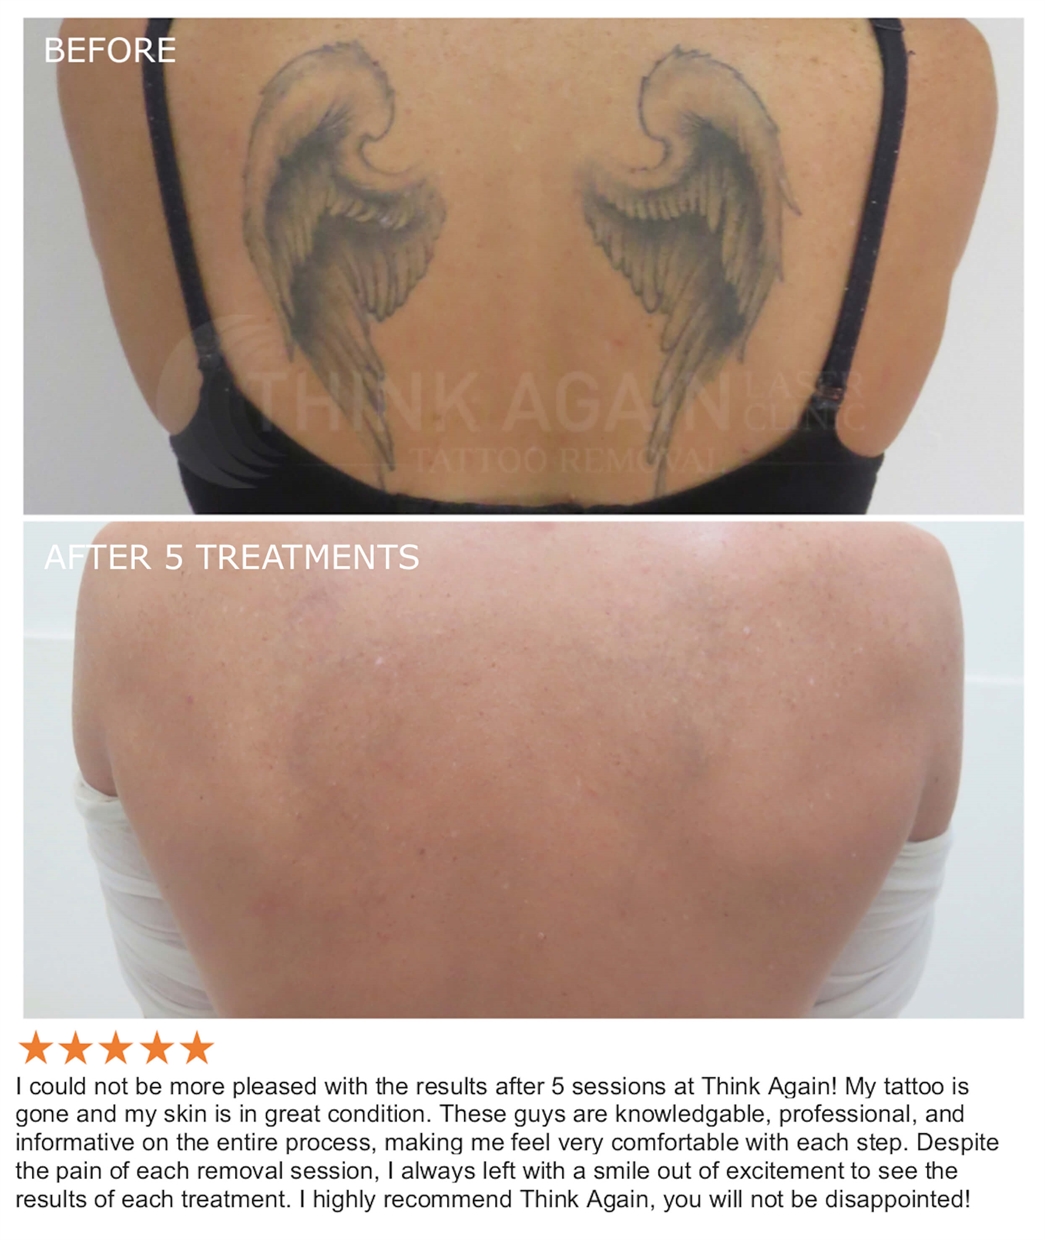 Laser Tattoo Removal Sydney - The #1 Rated Tattoo Removal Clinic